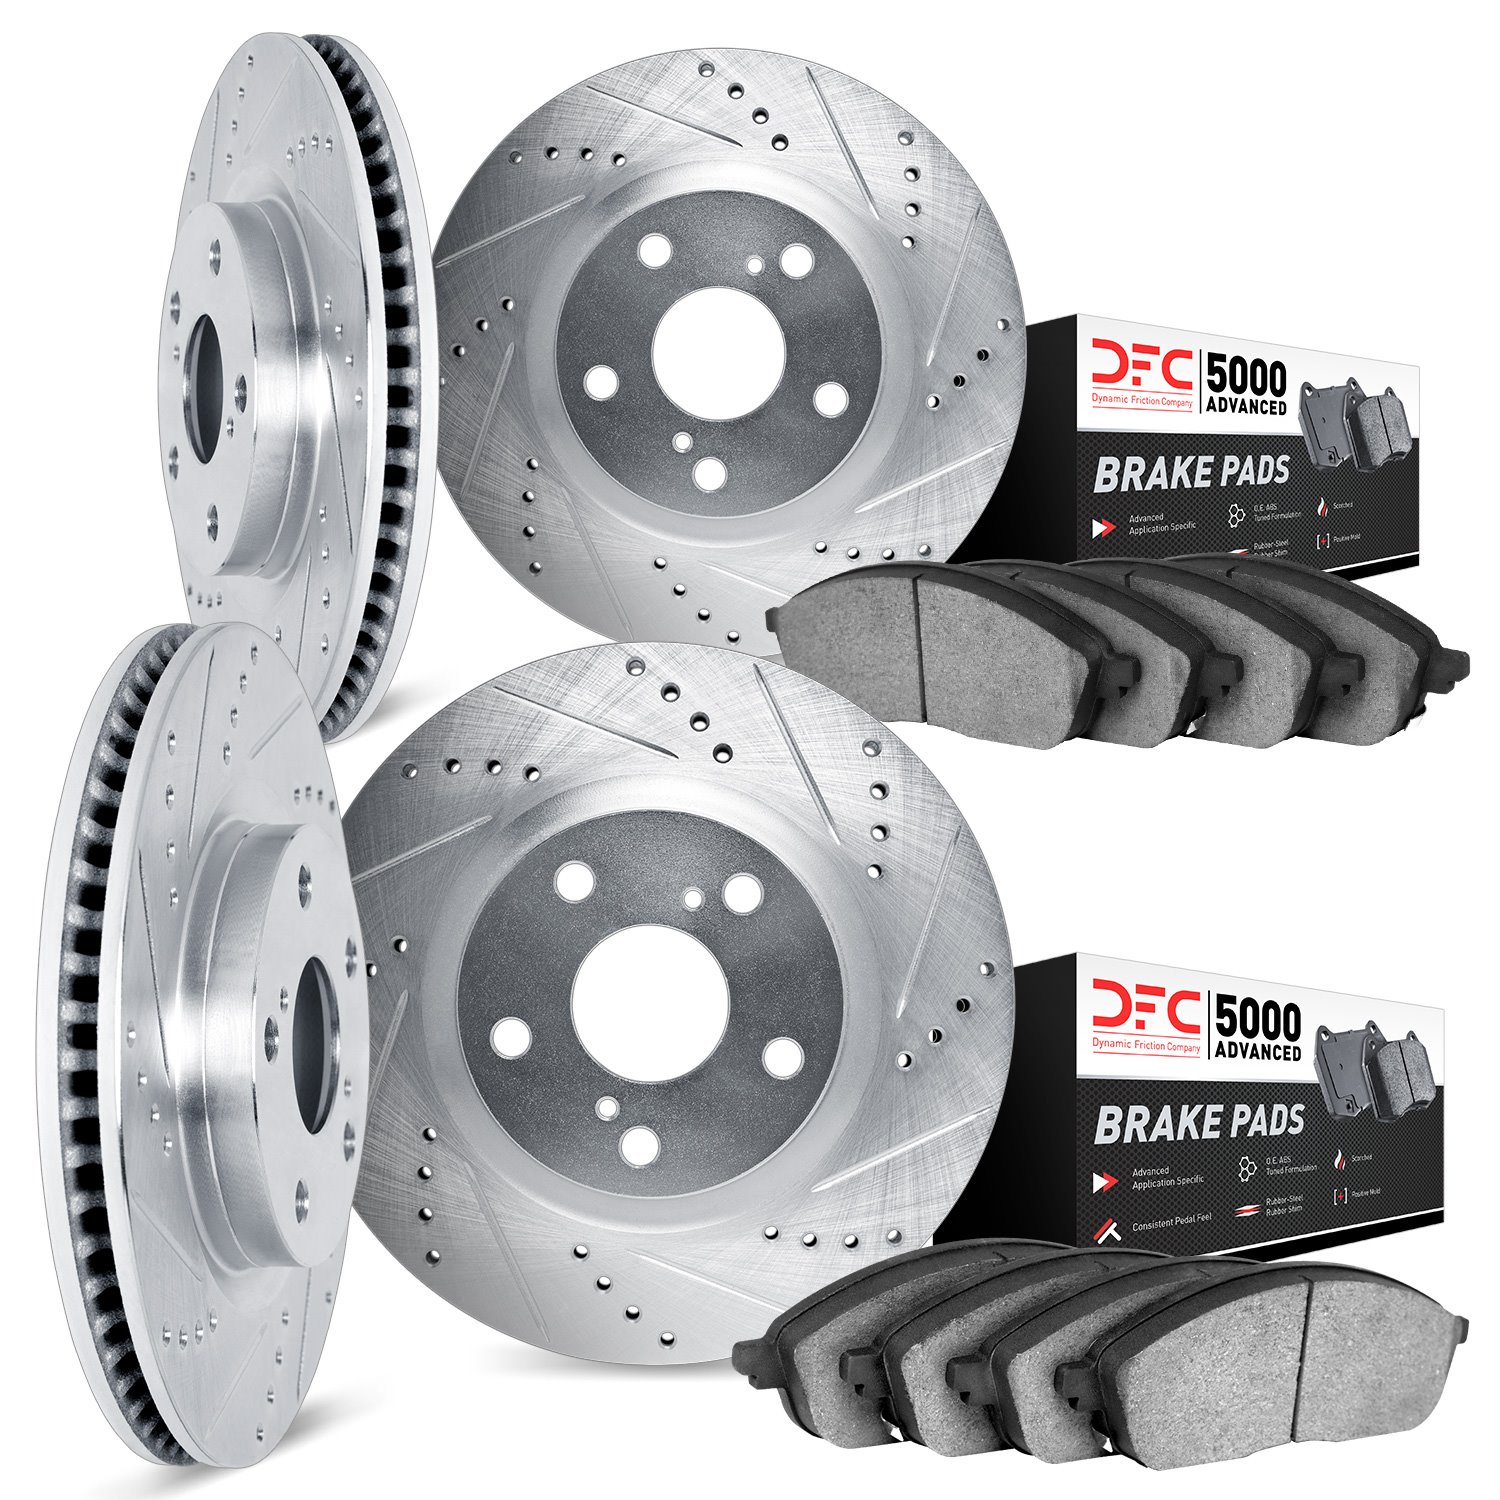 7504-46025 Drilled/Slotted Brake Rotors w/5000 Advanced Brake Pads Kit [Silver], 2014-2019 GM, Position: Front and Rear